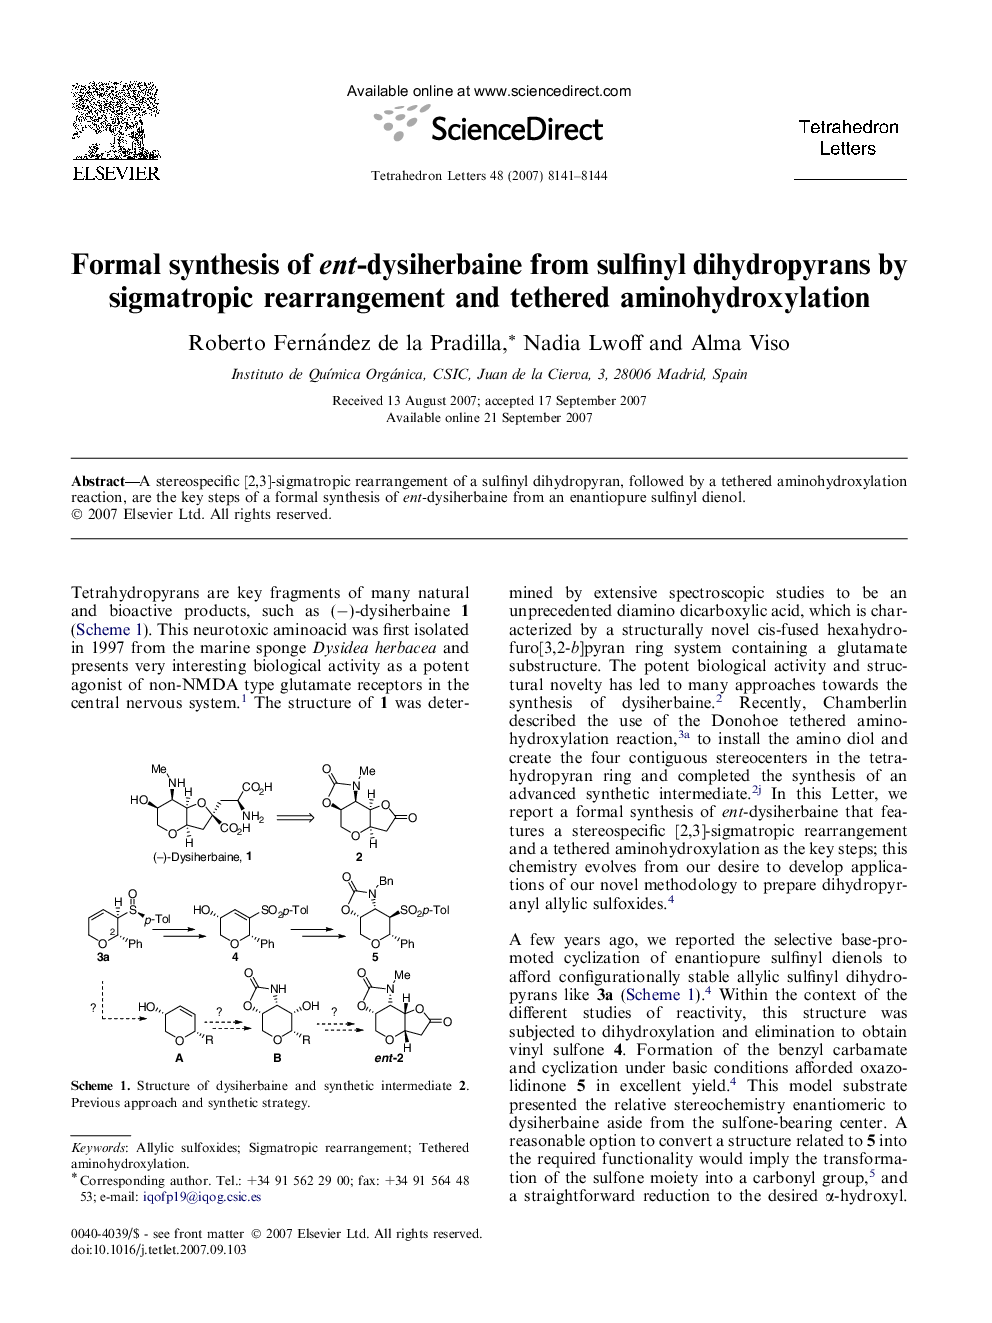 Formal synthesis of ent-dysiherbaine from sulfinyl dihydropyrans by sigmatropic rearrangement and tethered aminohydroxylation